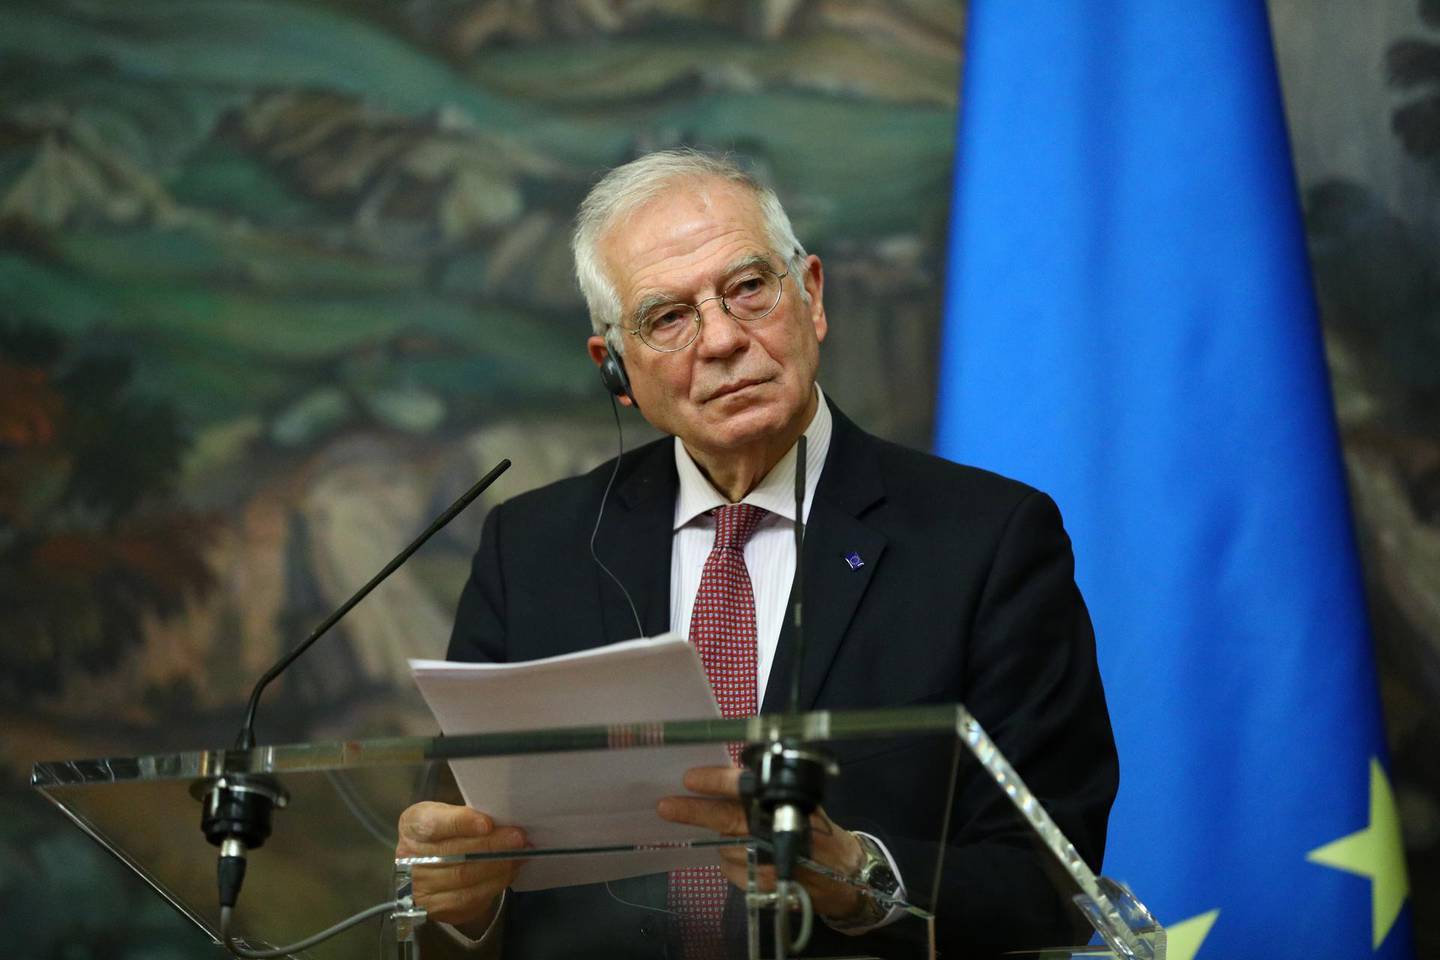 European Union's foreign policy chief Josep Borrell attends a news conference following a meeting with Russia's Foreign Minister Sergei Lavrov in Moscow, Russia February 5, 2021. Russian Foreign Ministry/Handout via REUTERS  ATTENTION EDITORS - THIS IMAGE WAS PROVIDED BY A THIRD PARTY. NO RESALES. NO ARCHIVES. MANDATORY CREDIT.